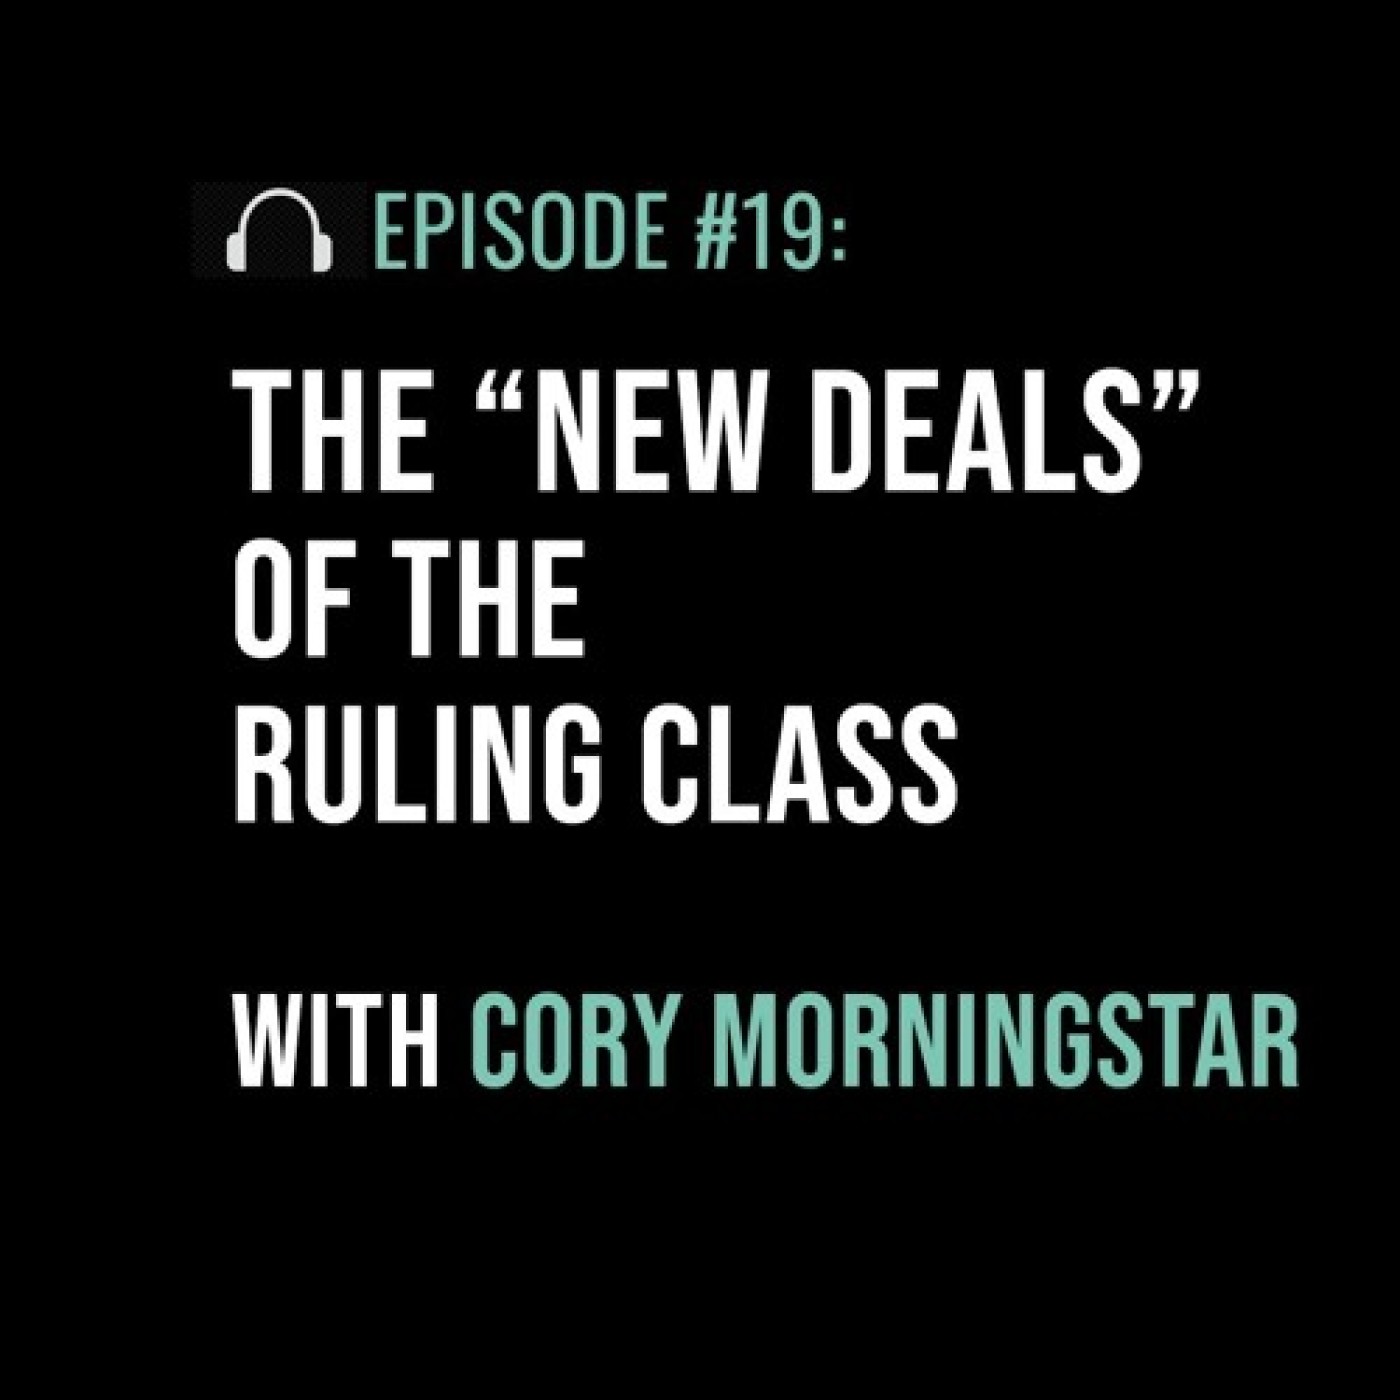 The “New Deals” of the Ruling Class with Cory Morningstar